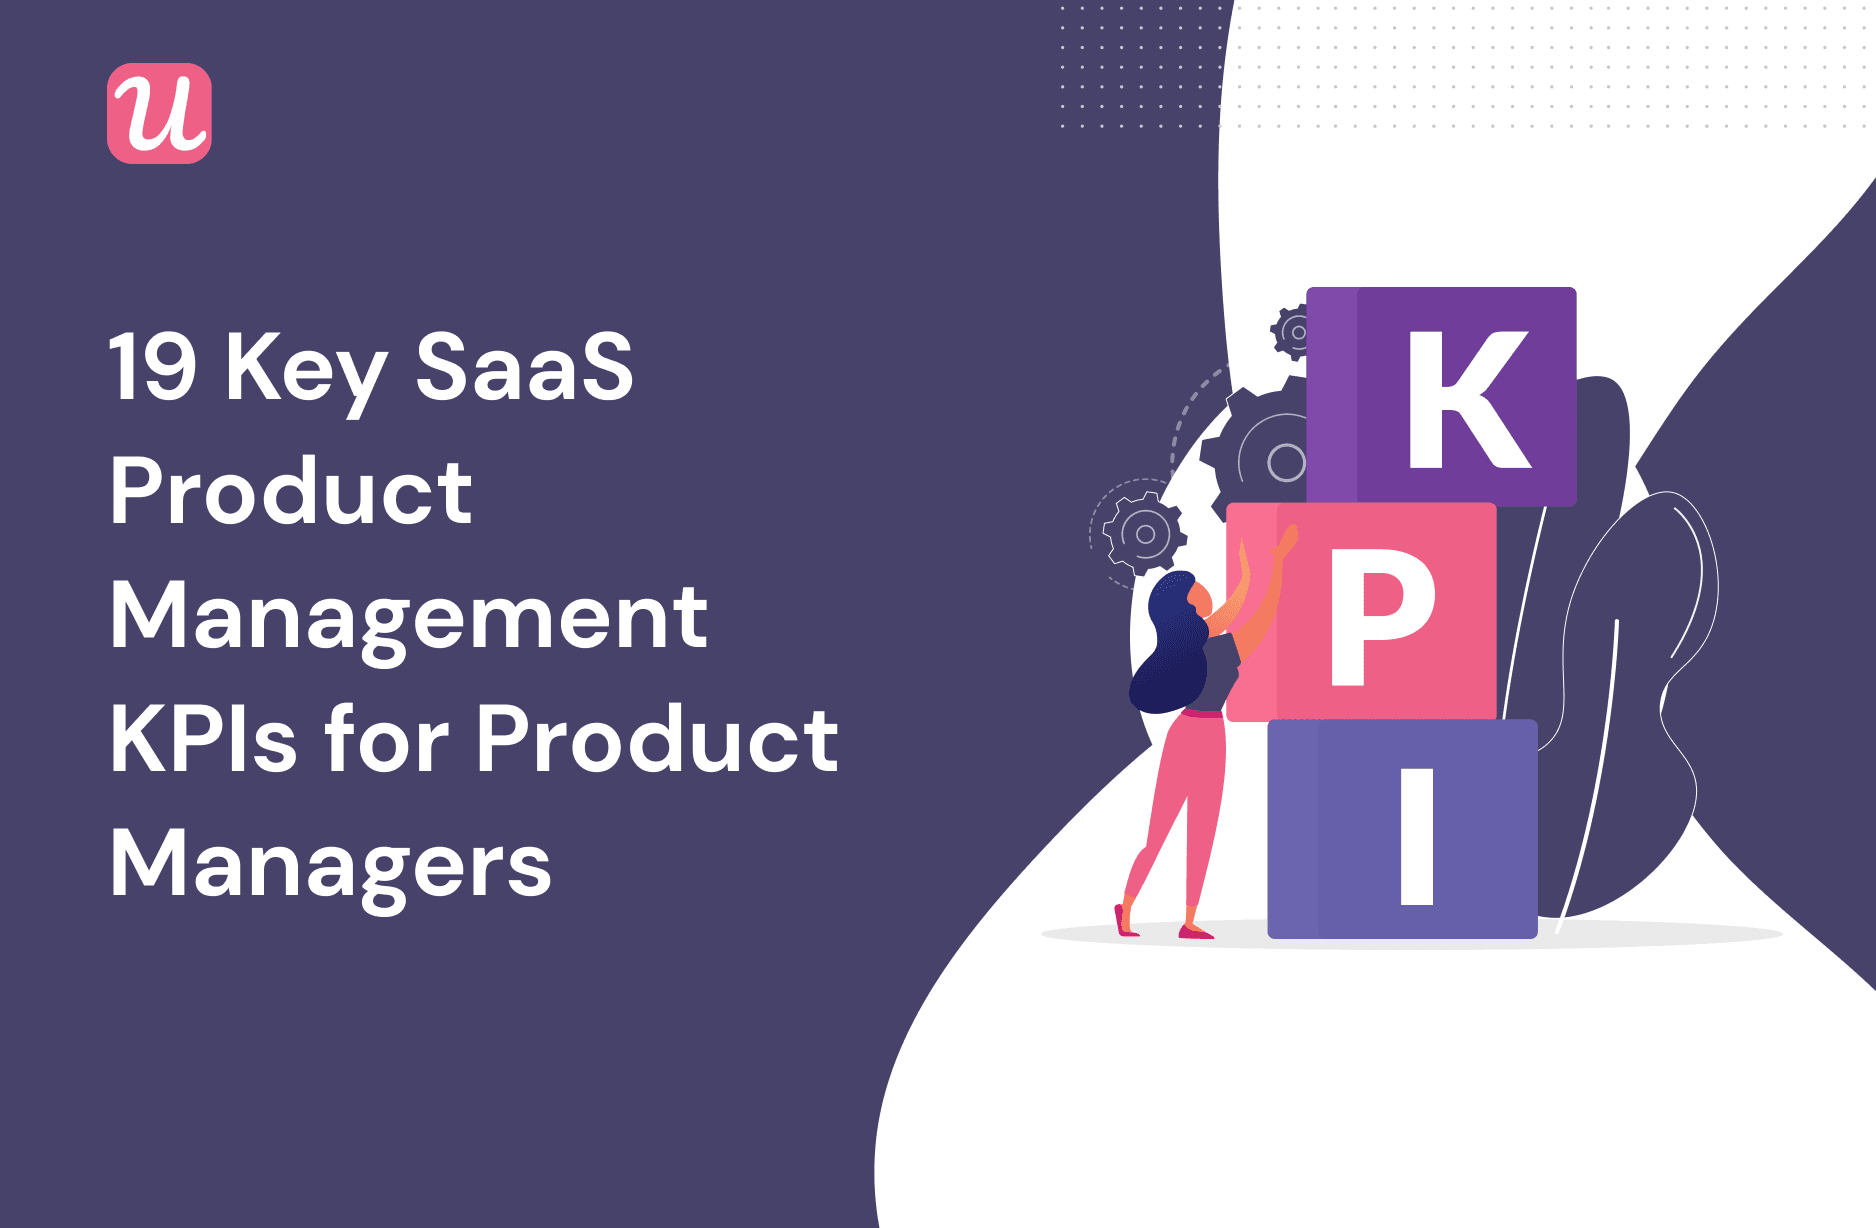 18 Key SaaS Product Management KPIs for Product Managers